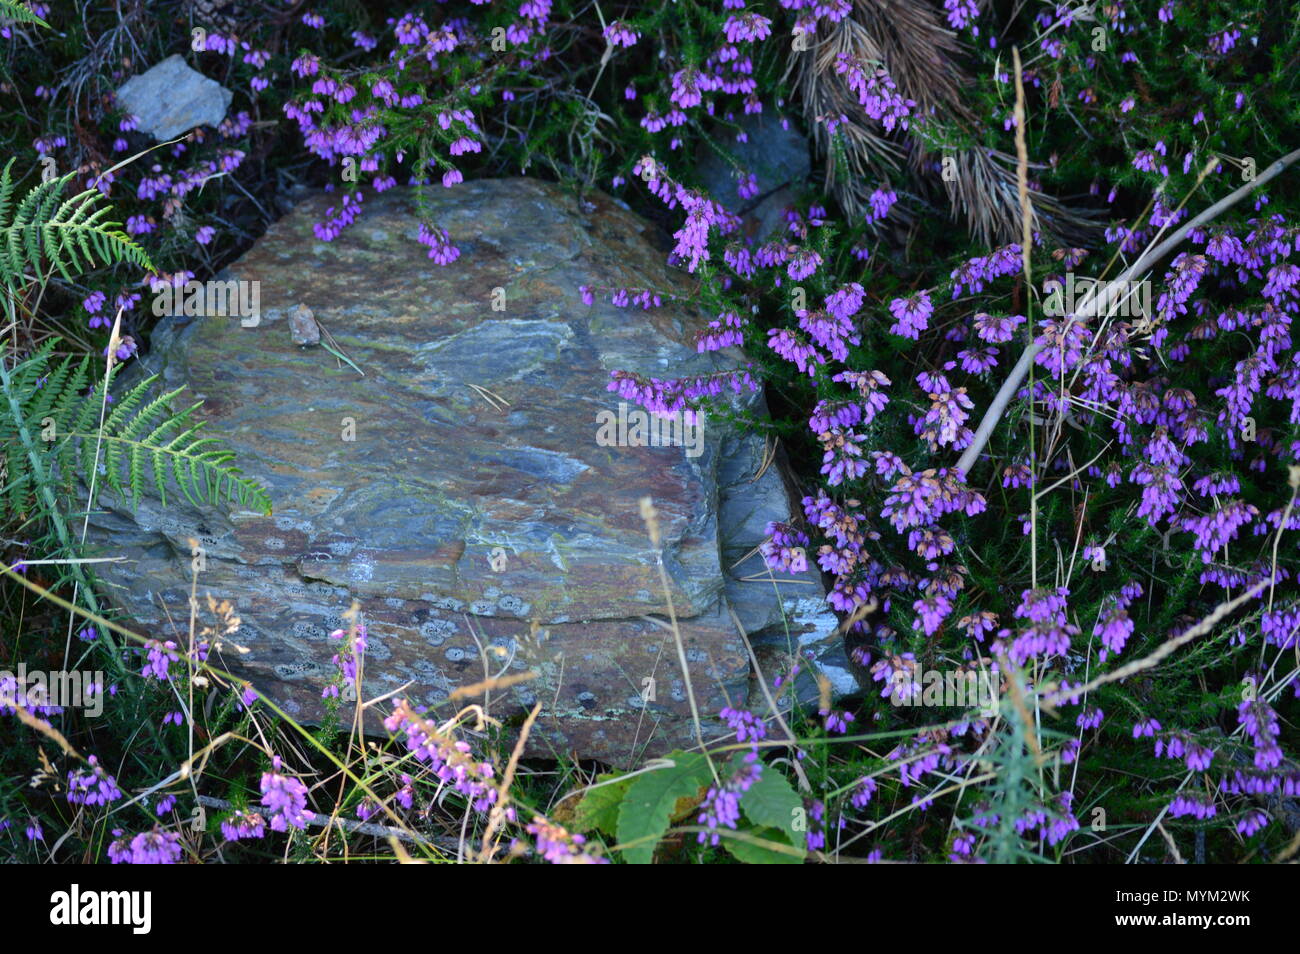 Beautiful Stone Surrounded By Mallow Flowers In Rebedul Meadows In Lugo. Flowers Landscapes Nature. August 18, 2016. Rebedul Becerrea Lugo Galicia Spa Stock Photo